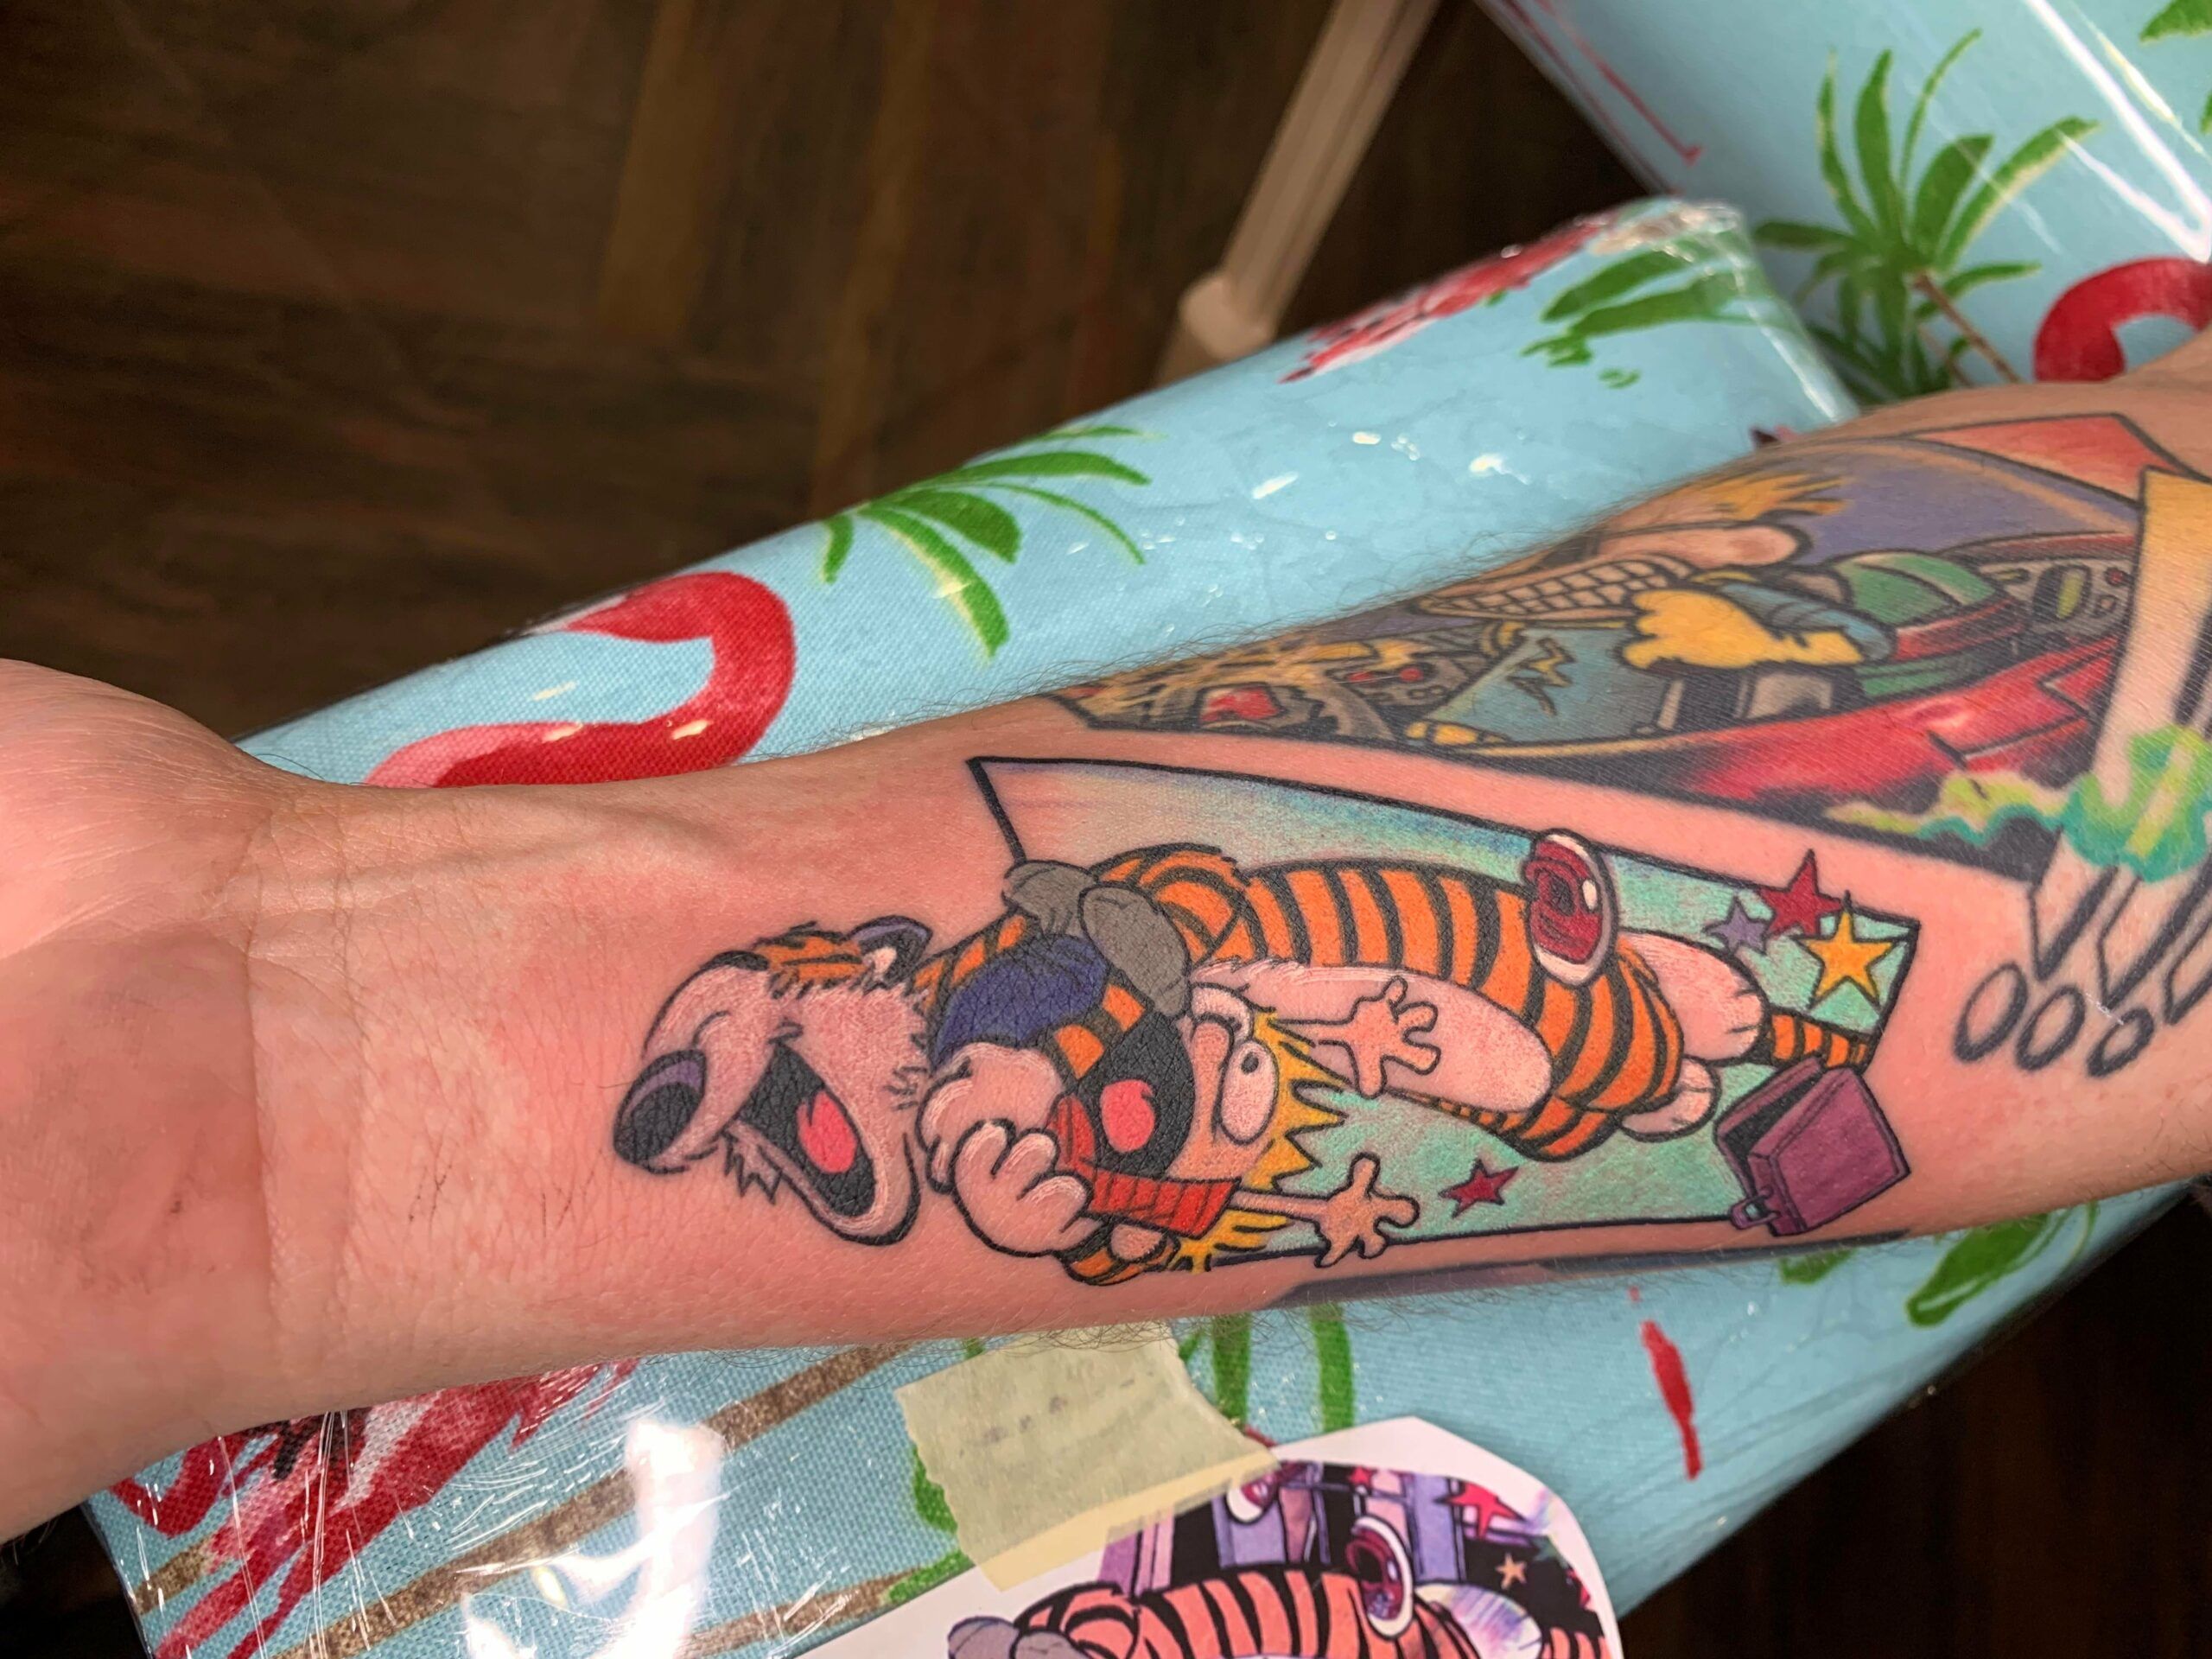 Calvin and Hobbes tat by @calebcashew from @blackomentattoo in Las scaled